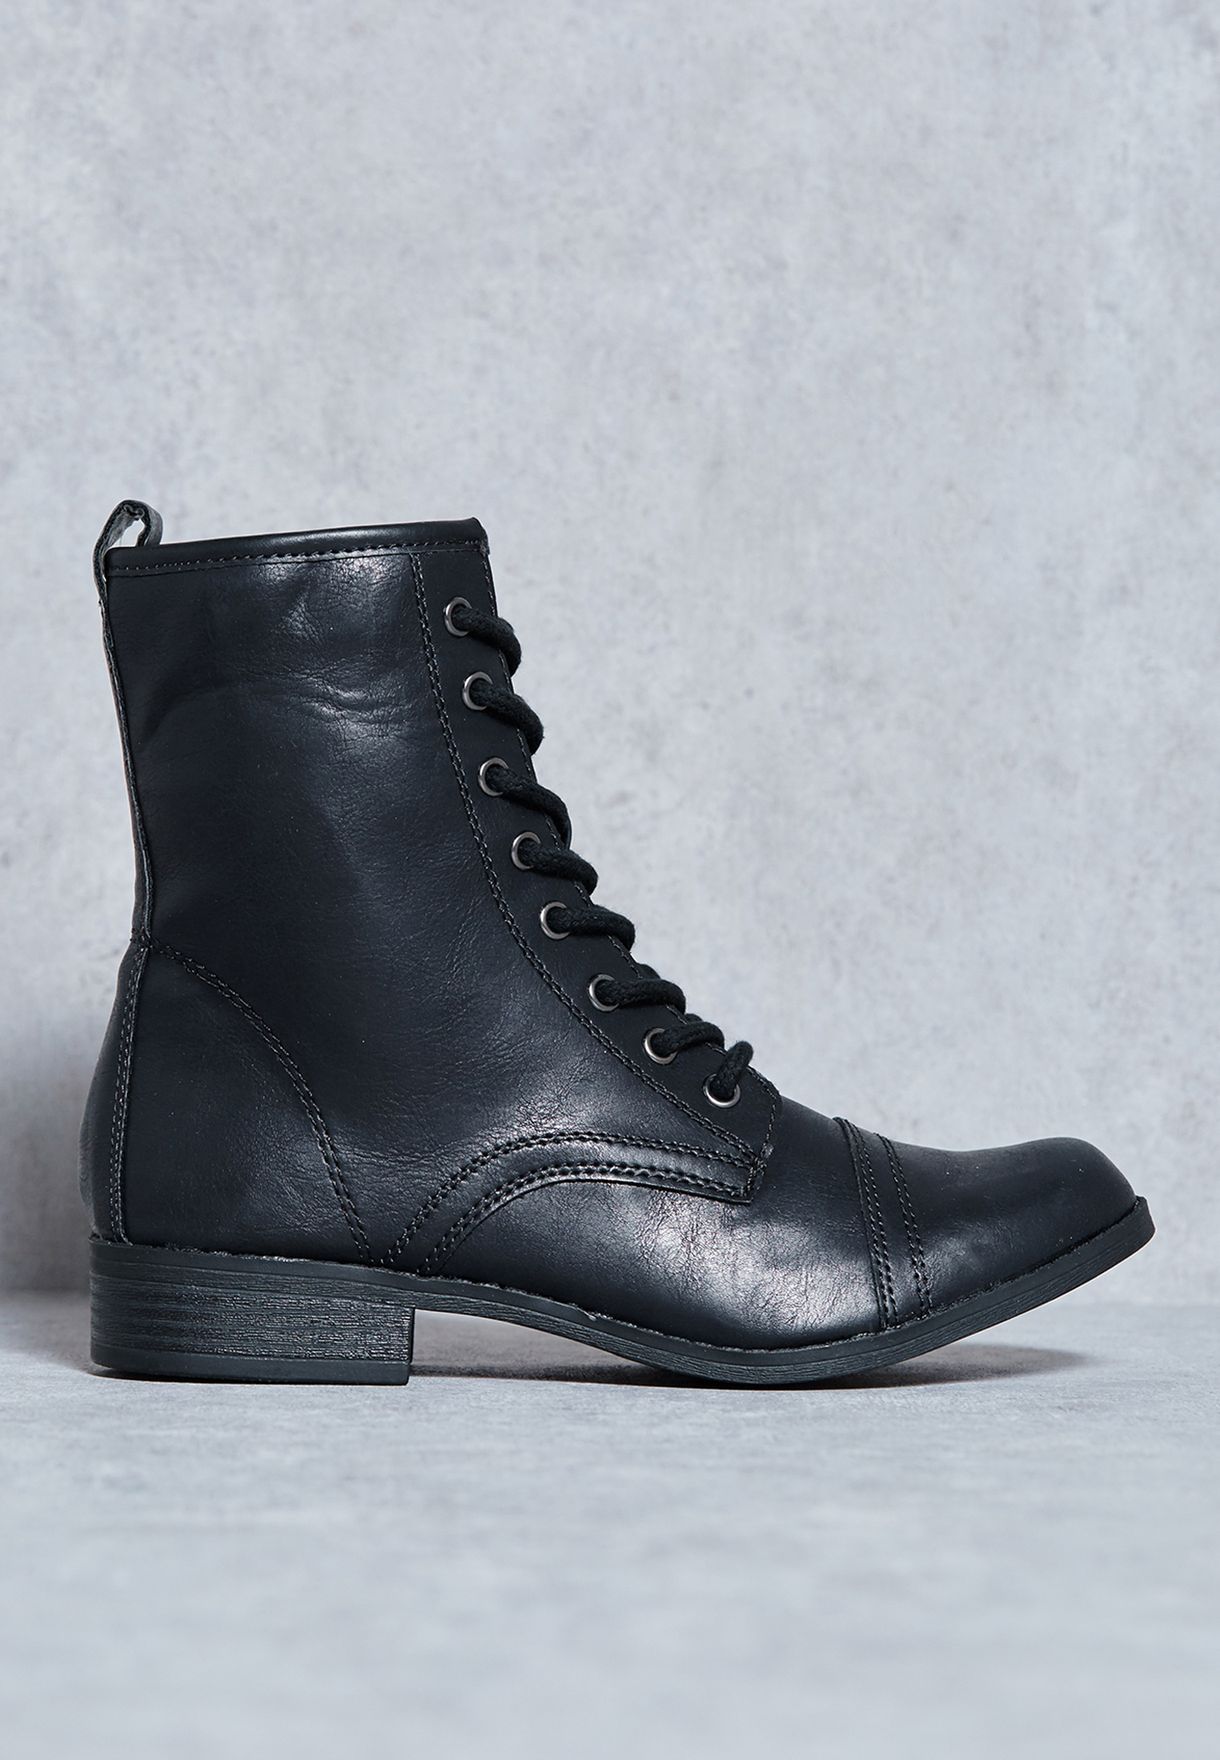 dorothy perkins lace up boots